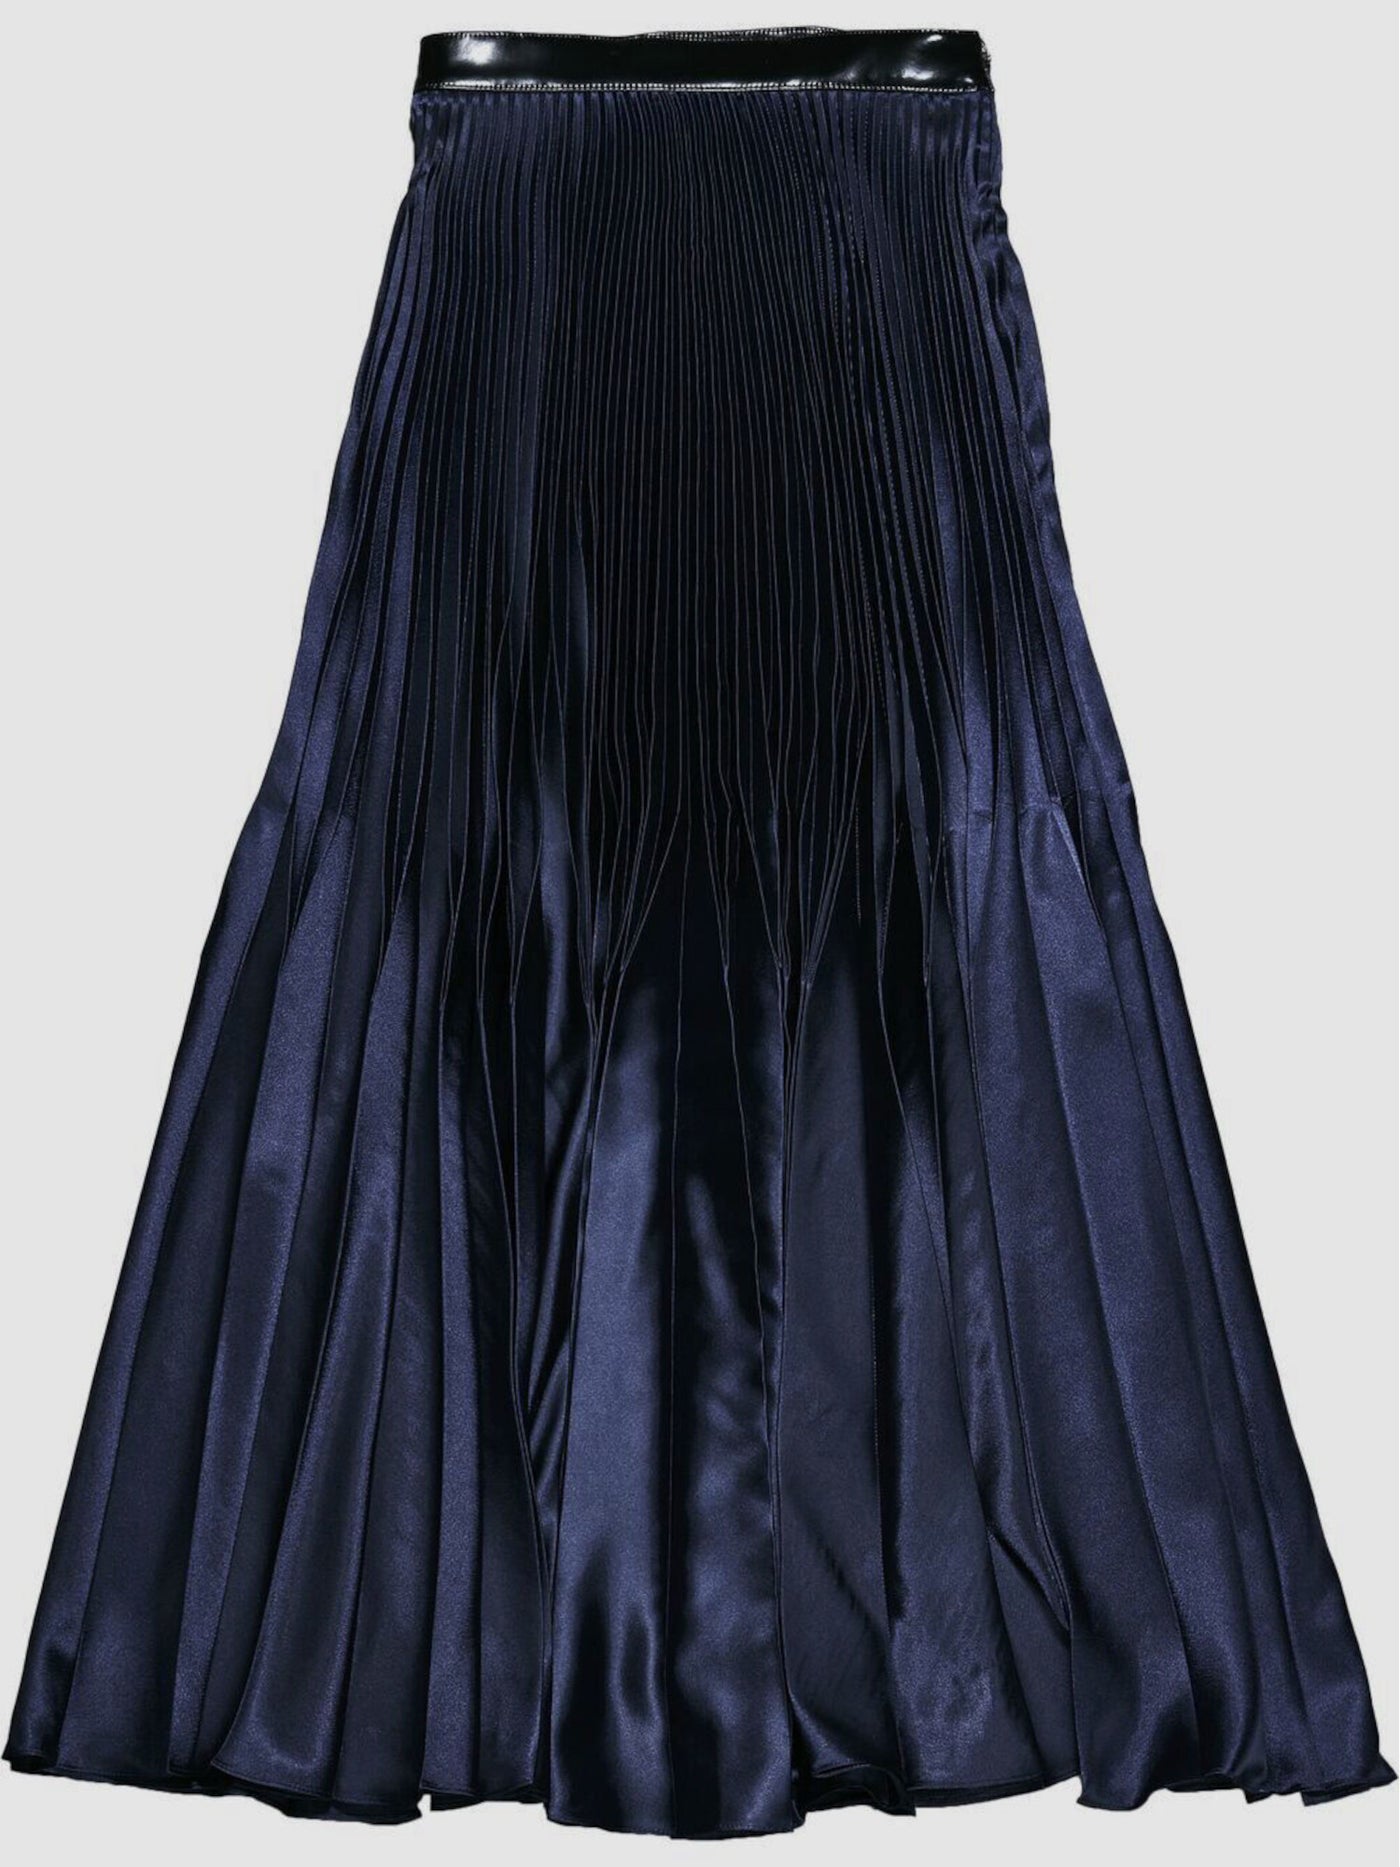 CHRISTOPHER KANE Womens Navy Pleated Zippered Faux Leather Waist Color Block Full-Length A-Line Skirt 4